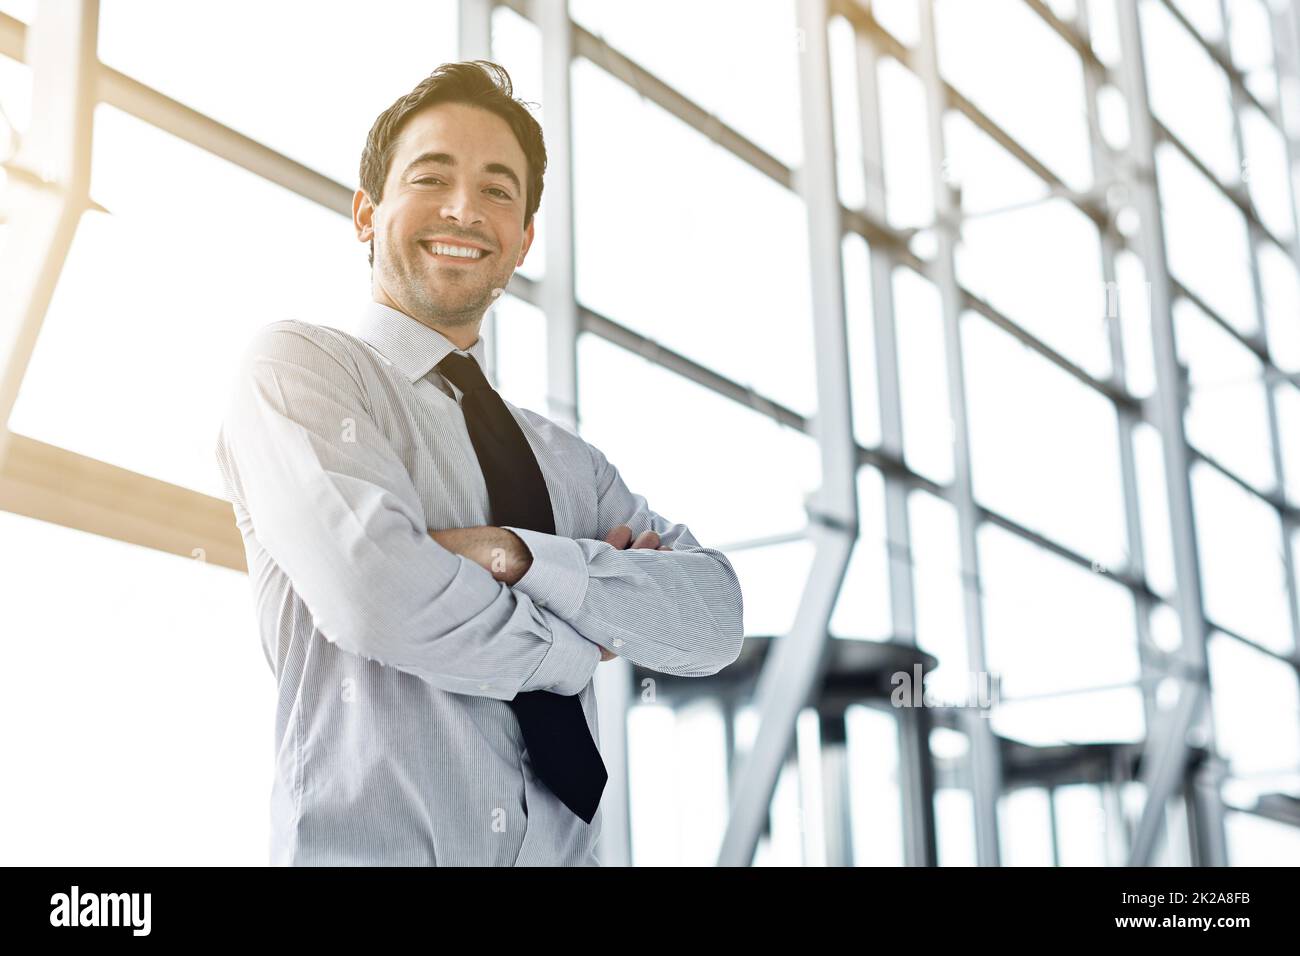 Doing business with the right attitude. Cropped portrait of a businessman standing in the lobby. Stock Photo